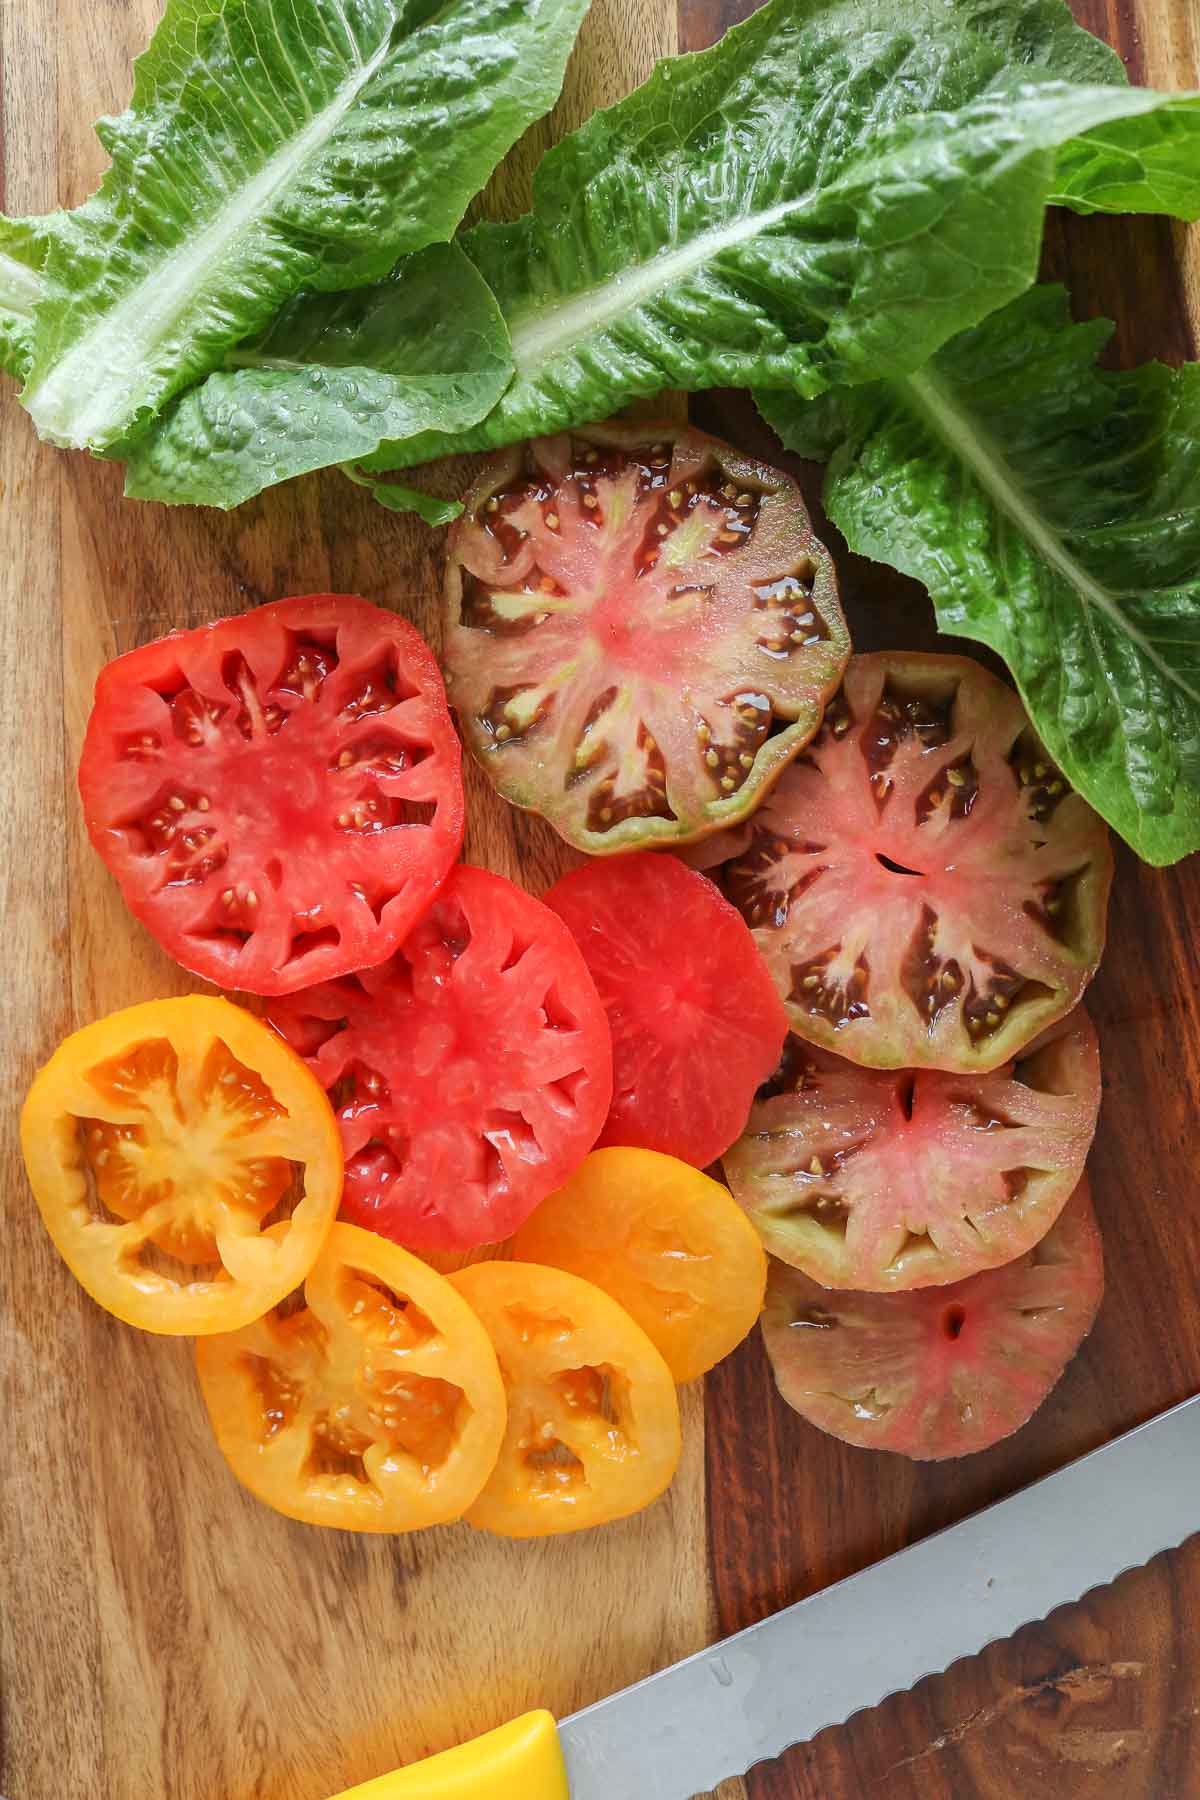 Sliced heirloom tomatoes and leaves of lettuce on a cutting board with a knife.